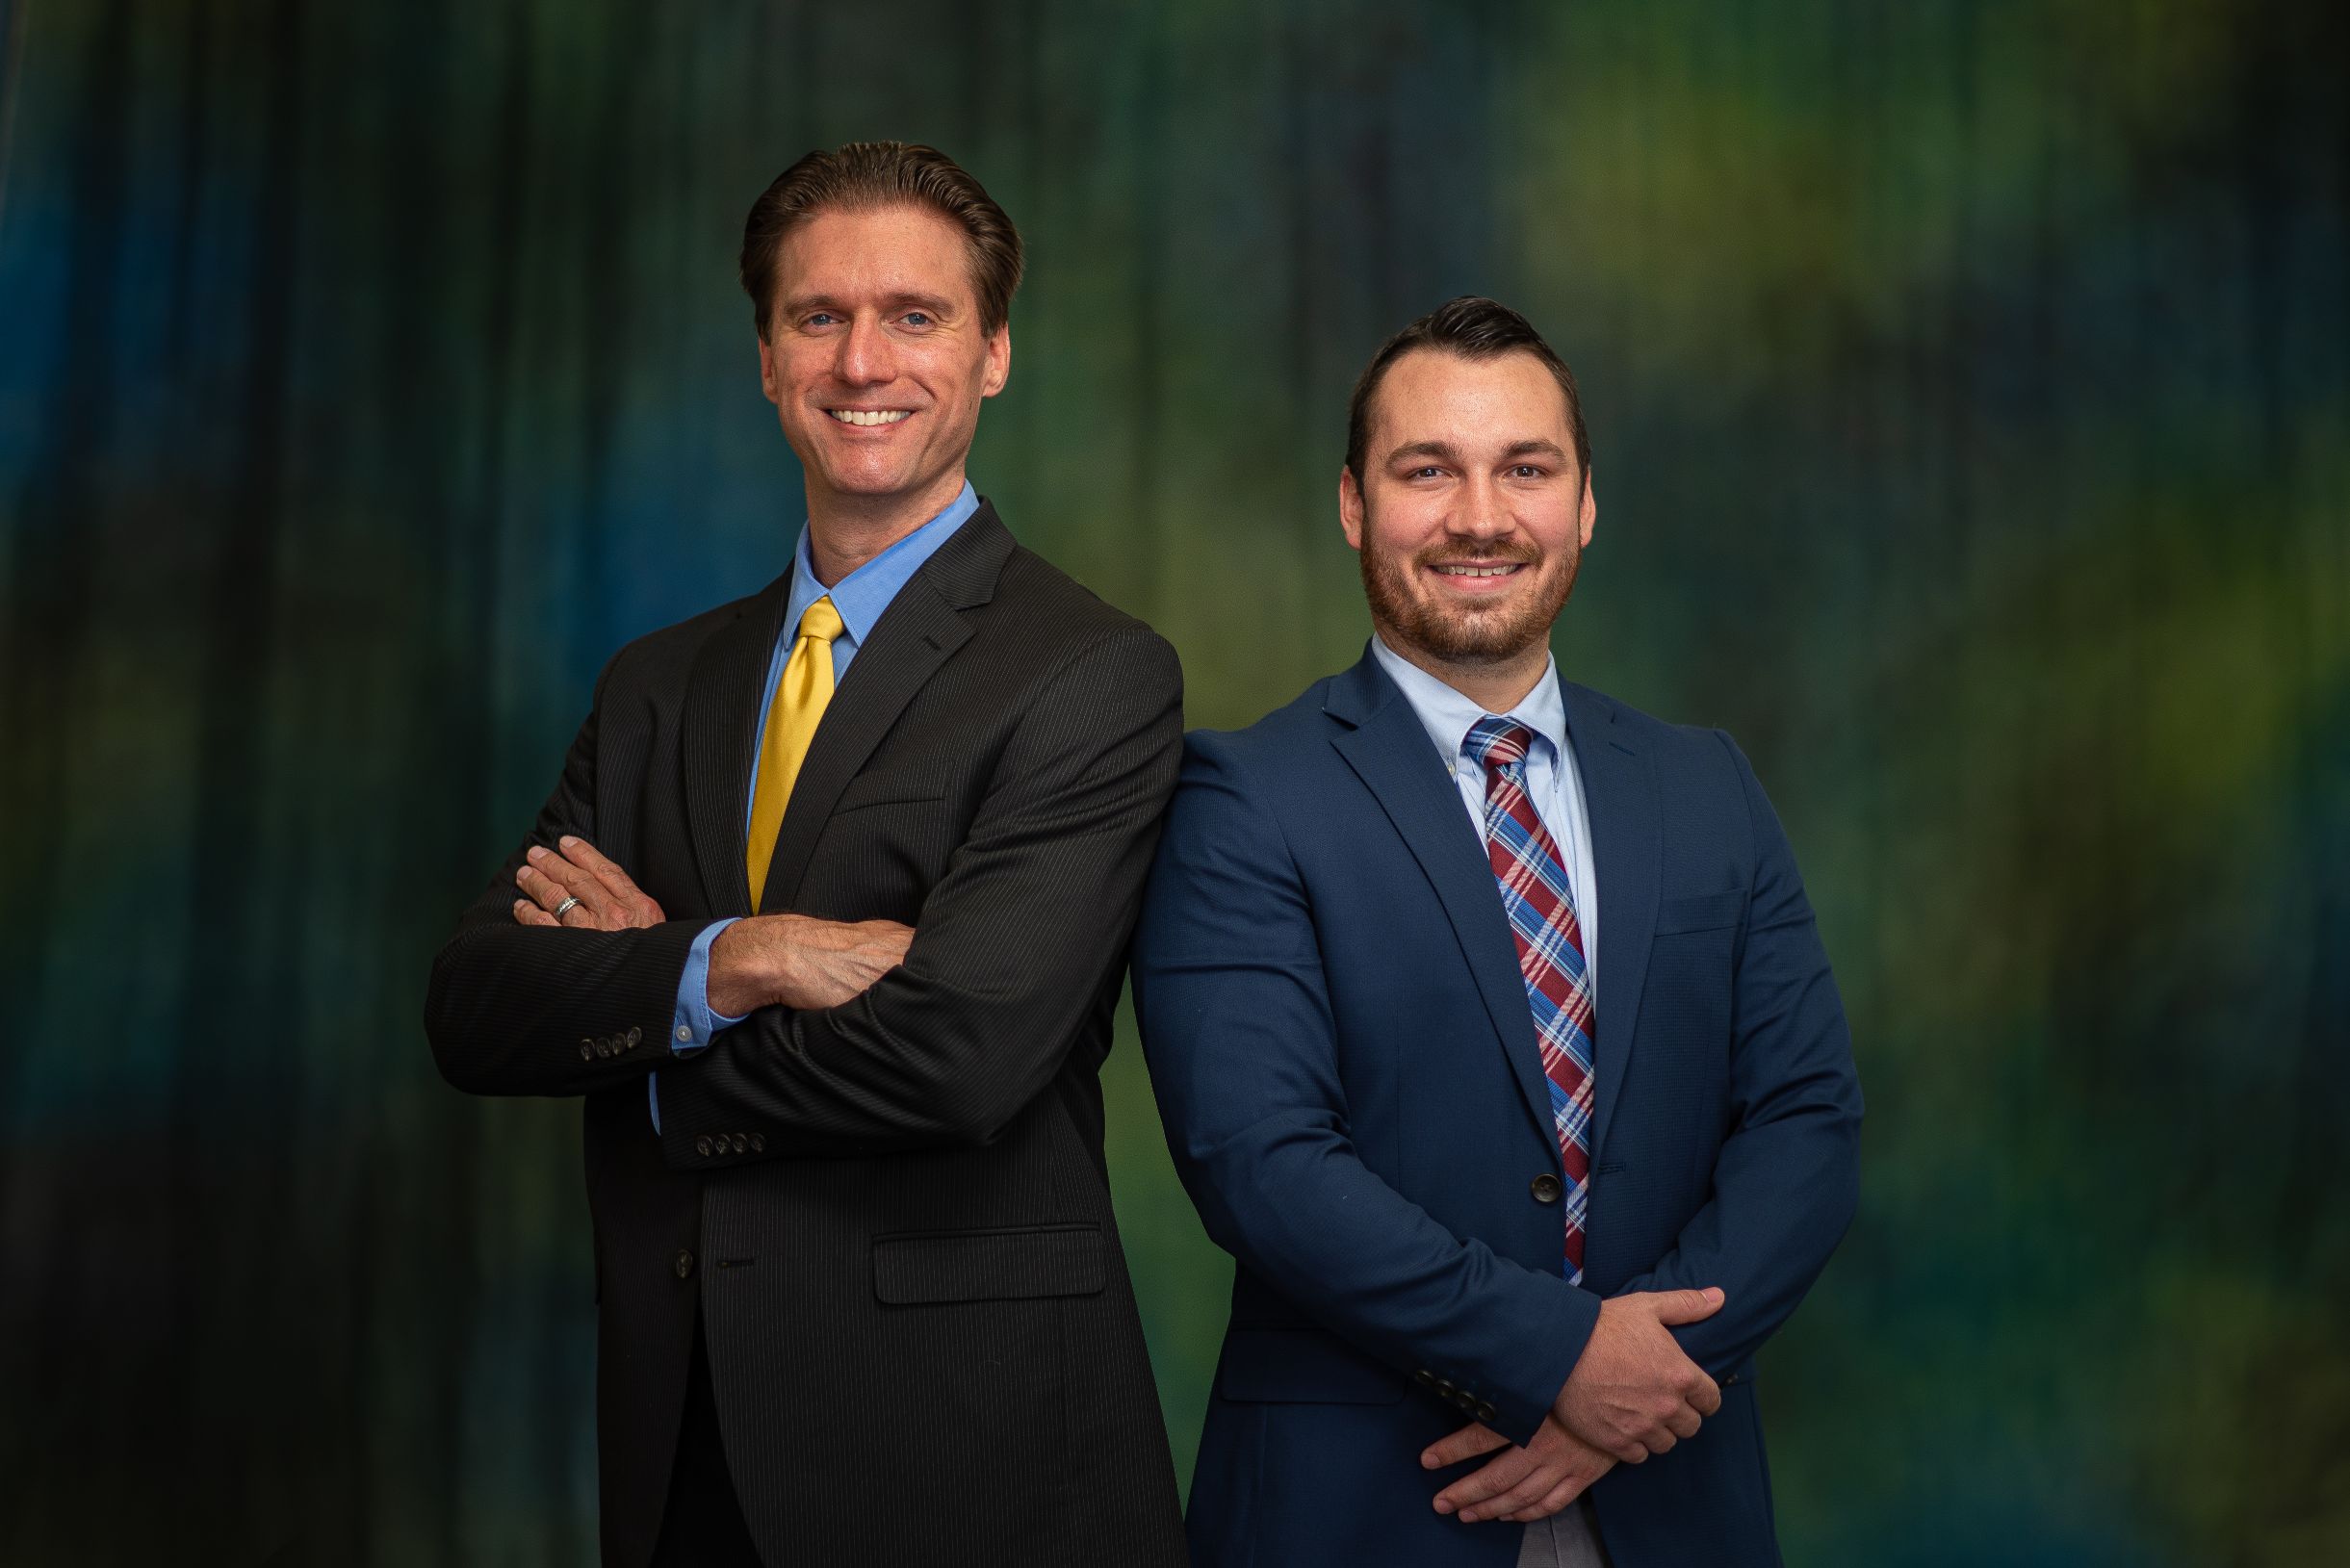 Dr. Robert Arsenault and Dr. Price focus is on helping you get back to your active life style. The doctors have clinical emphasis on disc injuries of the spine, utilizing Pulstar adjusting technology, decompression and various other therapies and techniques. 